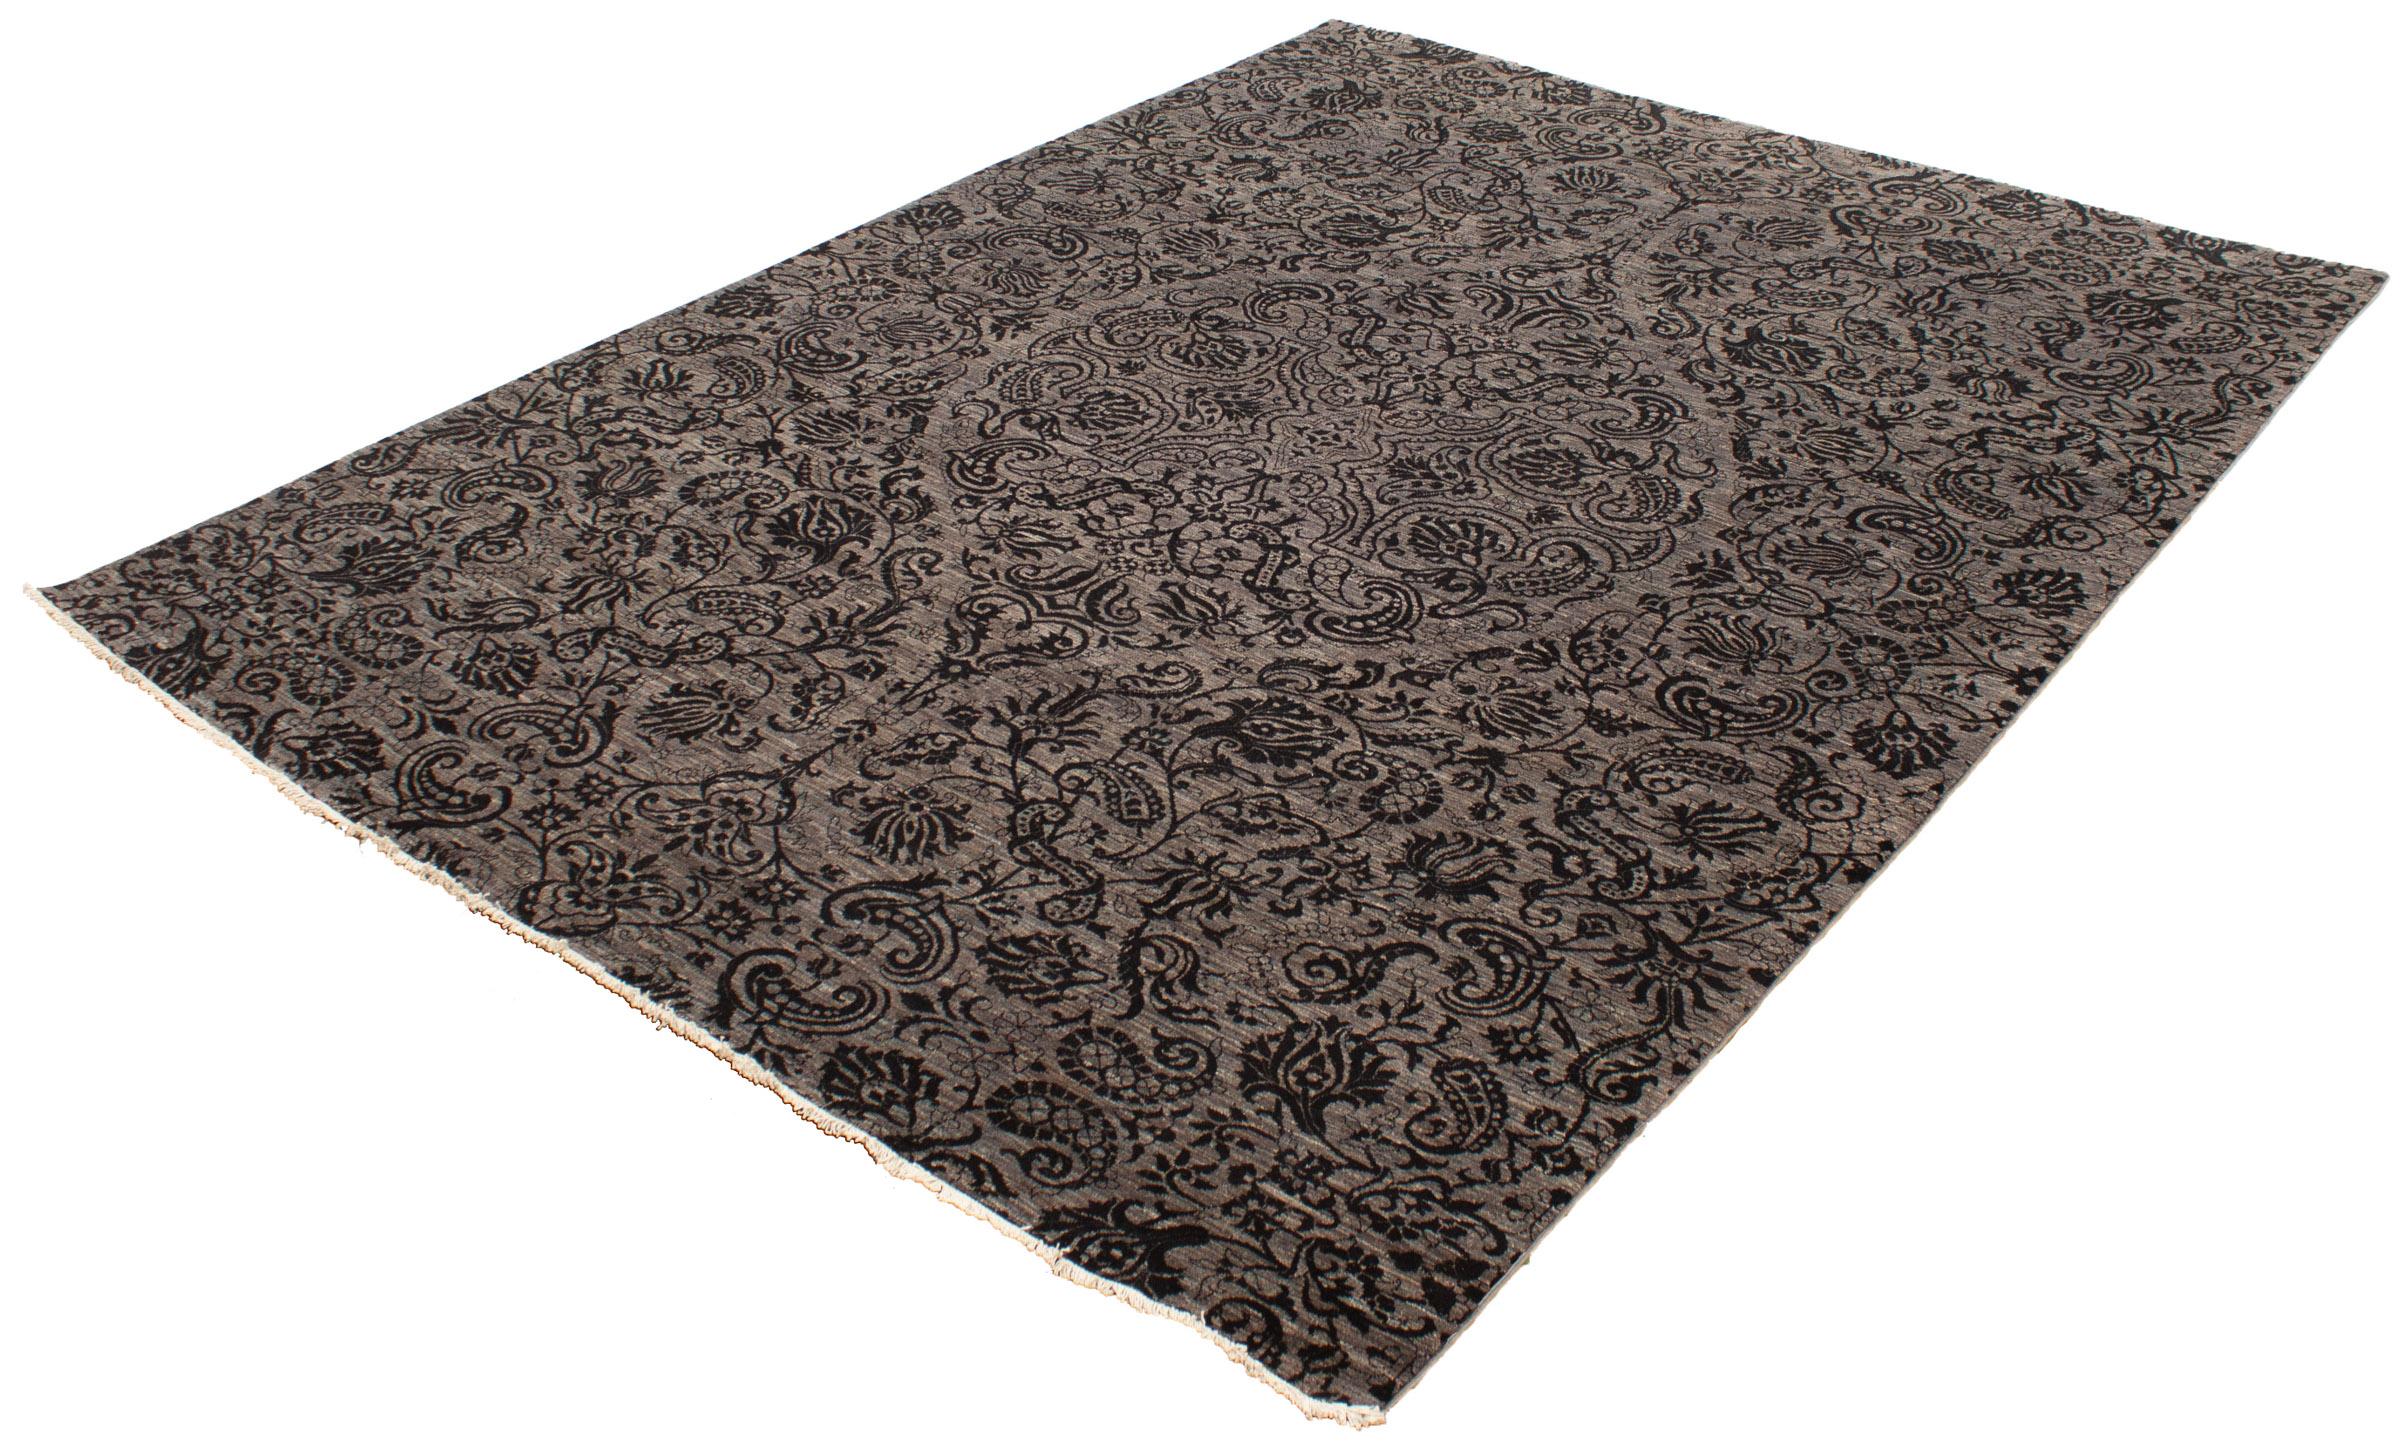 Modern Gray and Black Wool Transitional Paisley Hand-Knotted Carpet, 9' x 12' For Sale